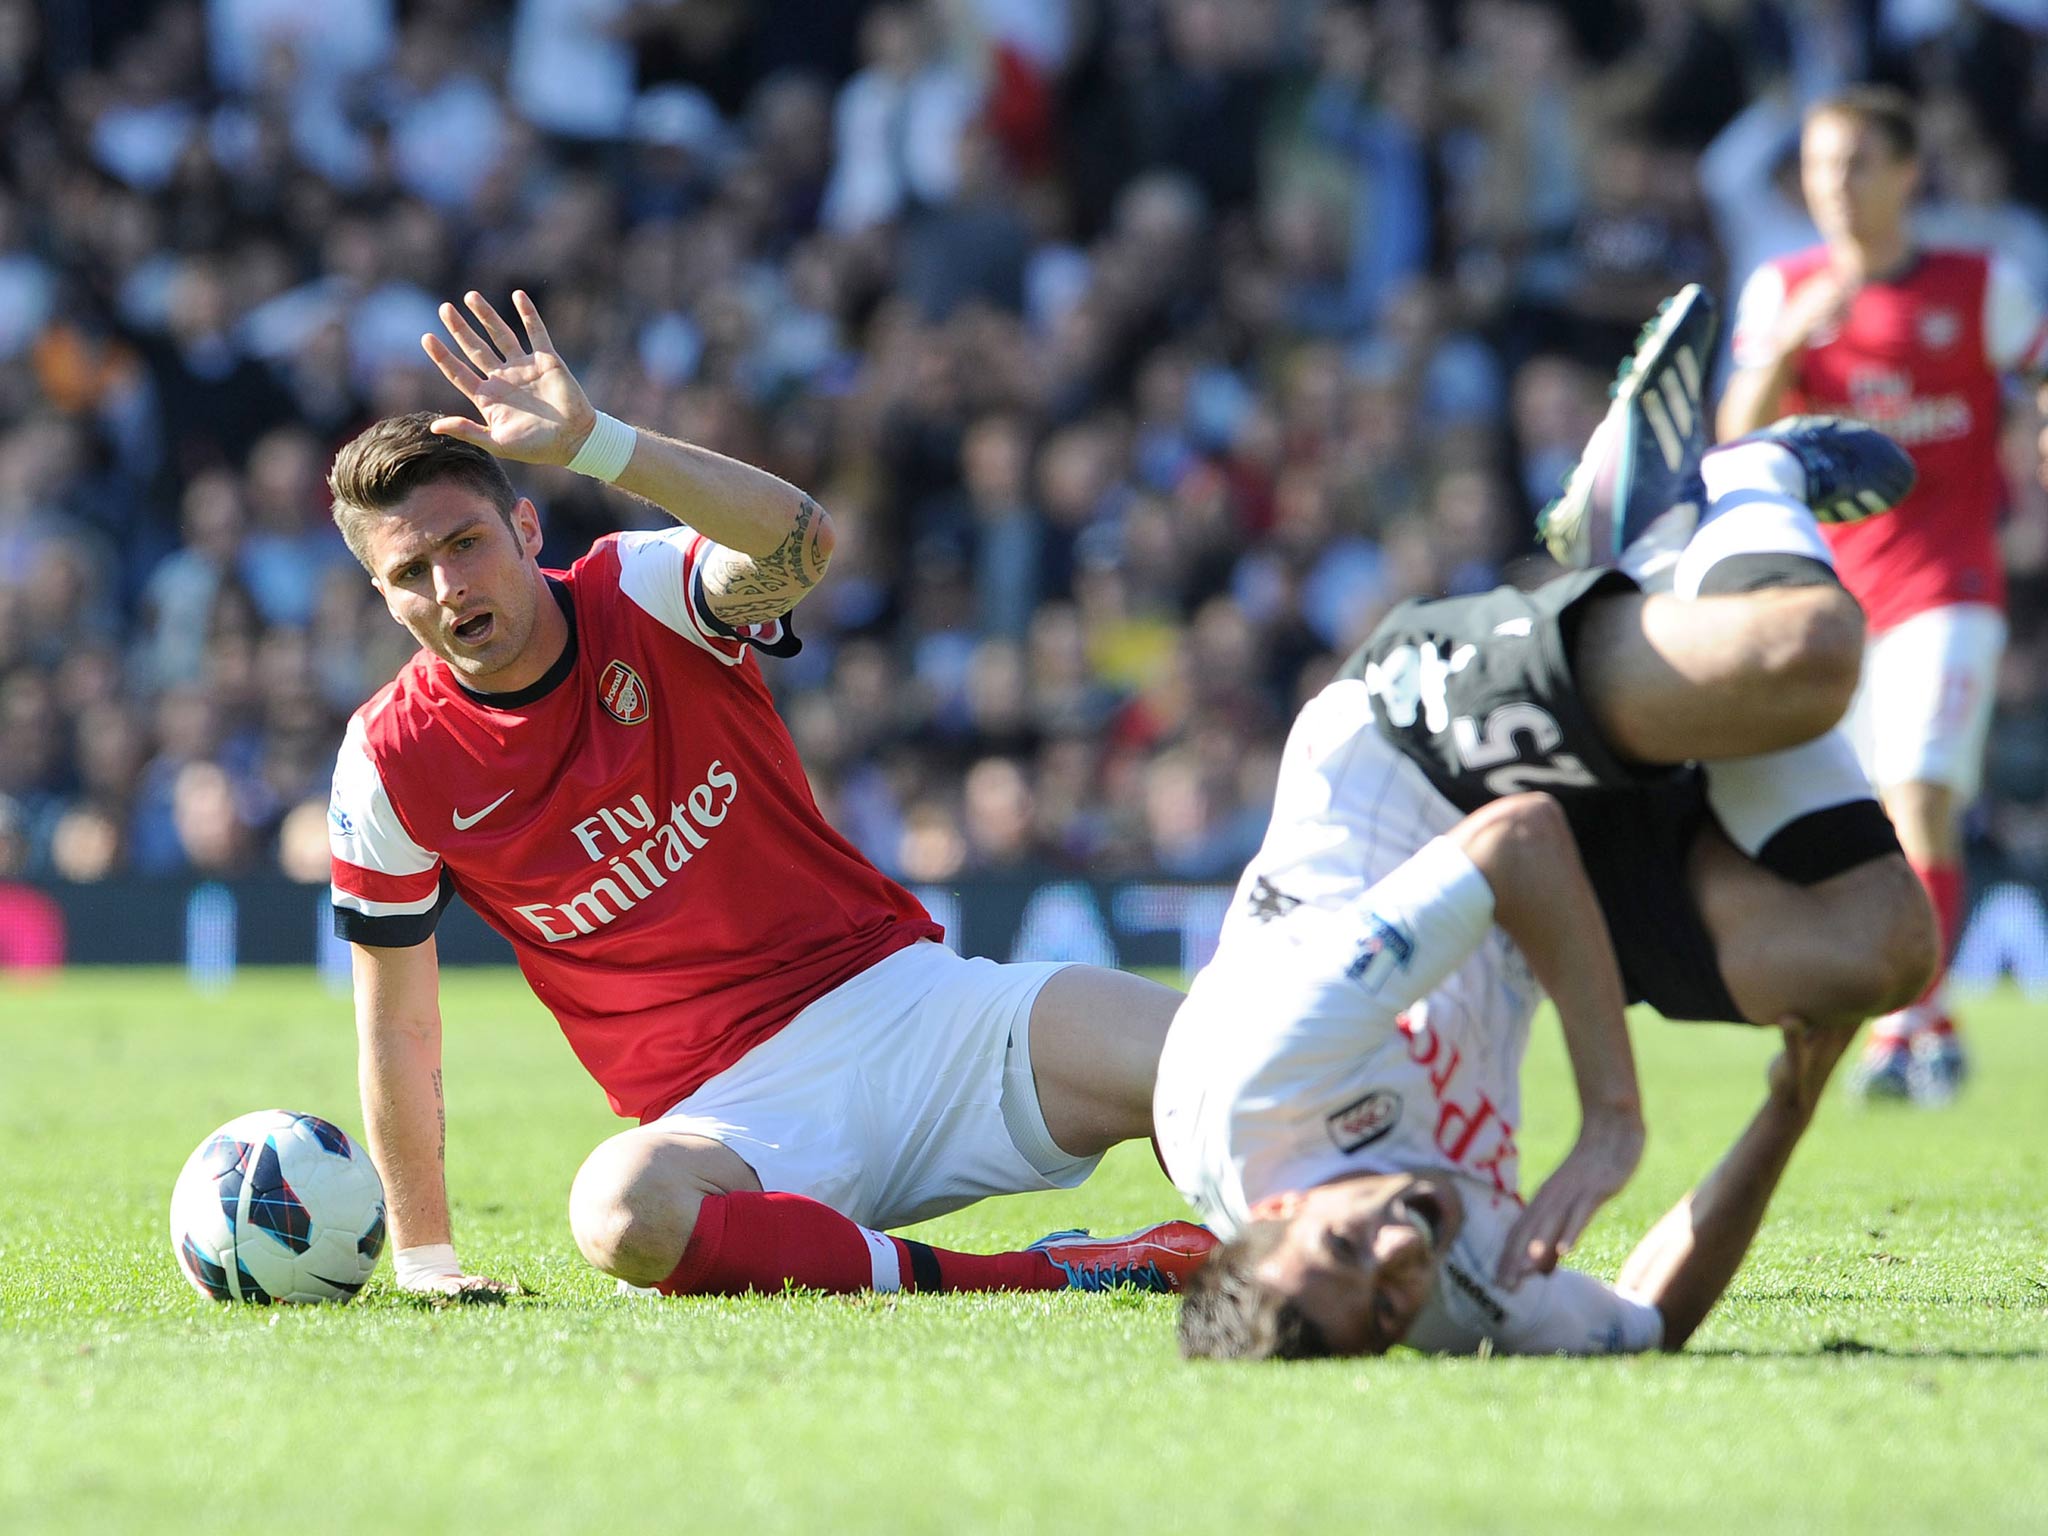 Arsenal striker Olivier Giroud saw red for a late challenge in the game against Fulham